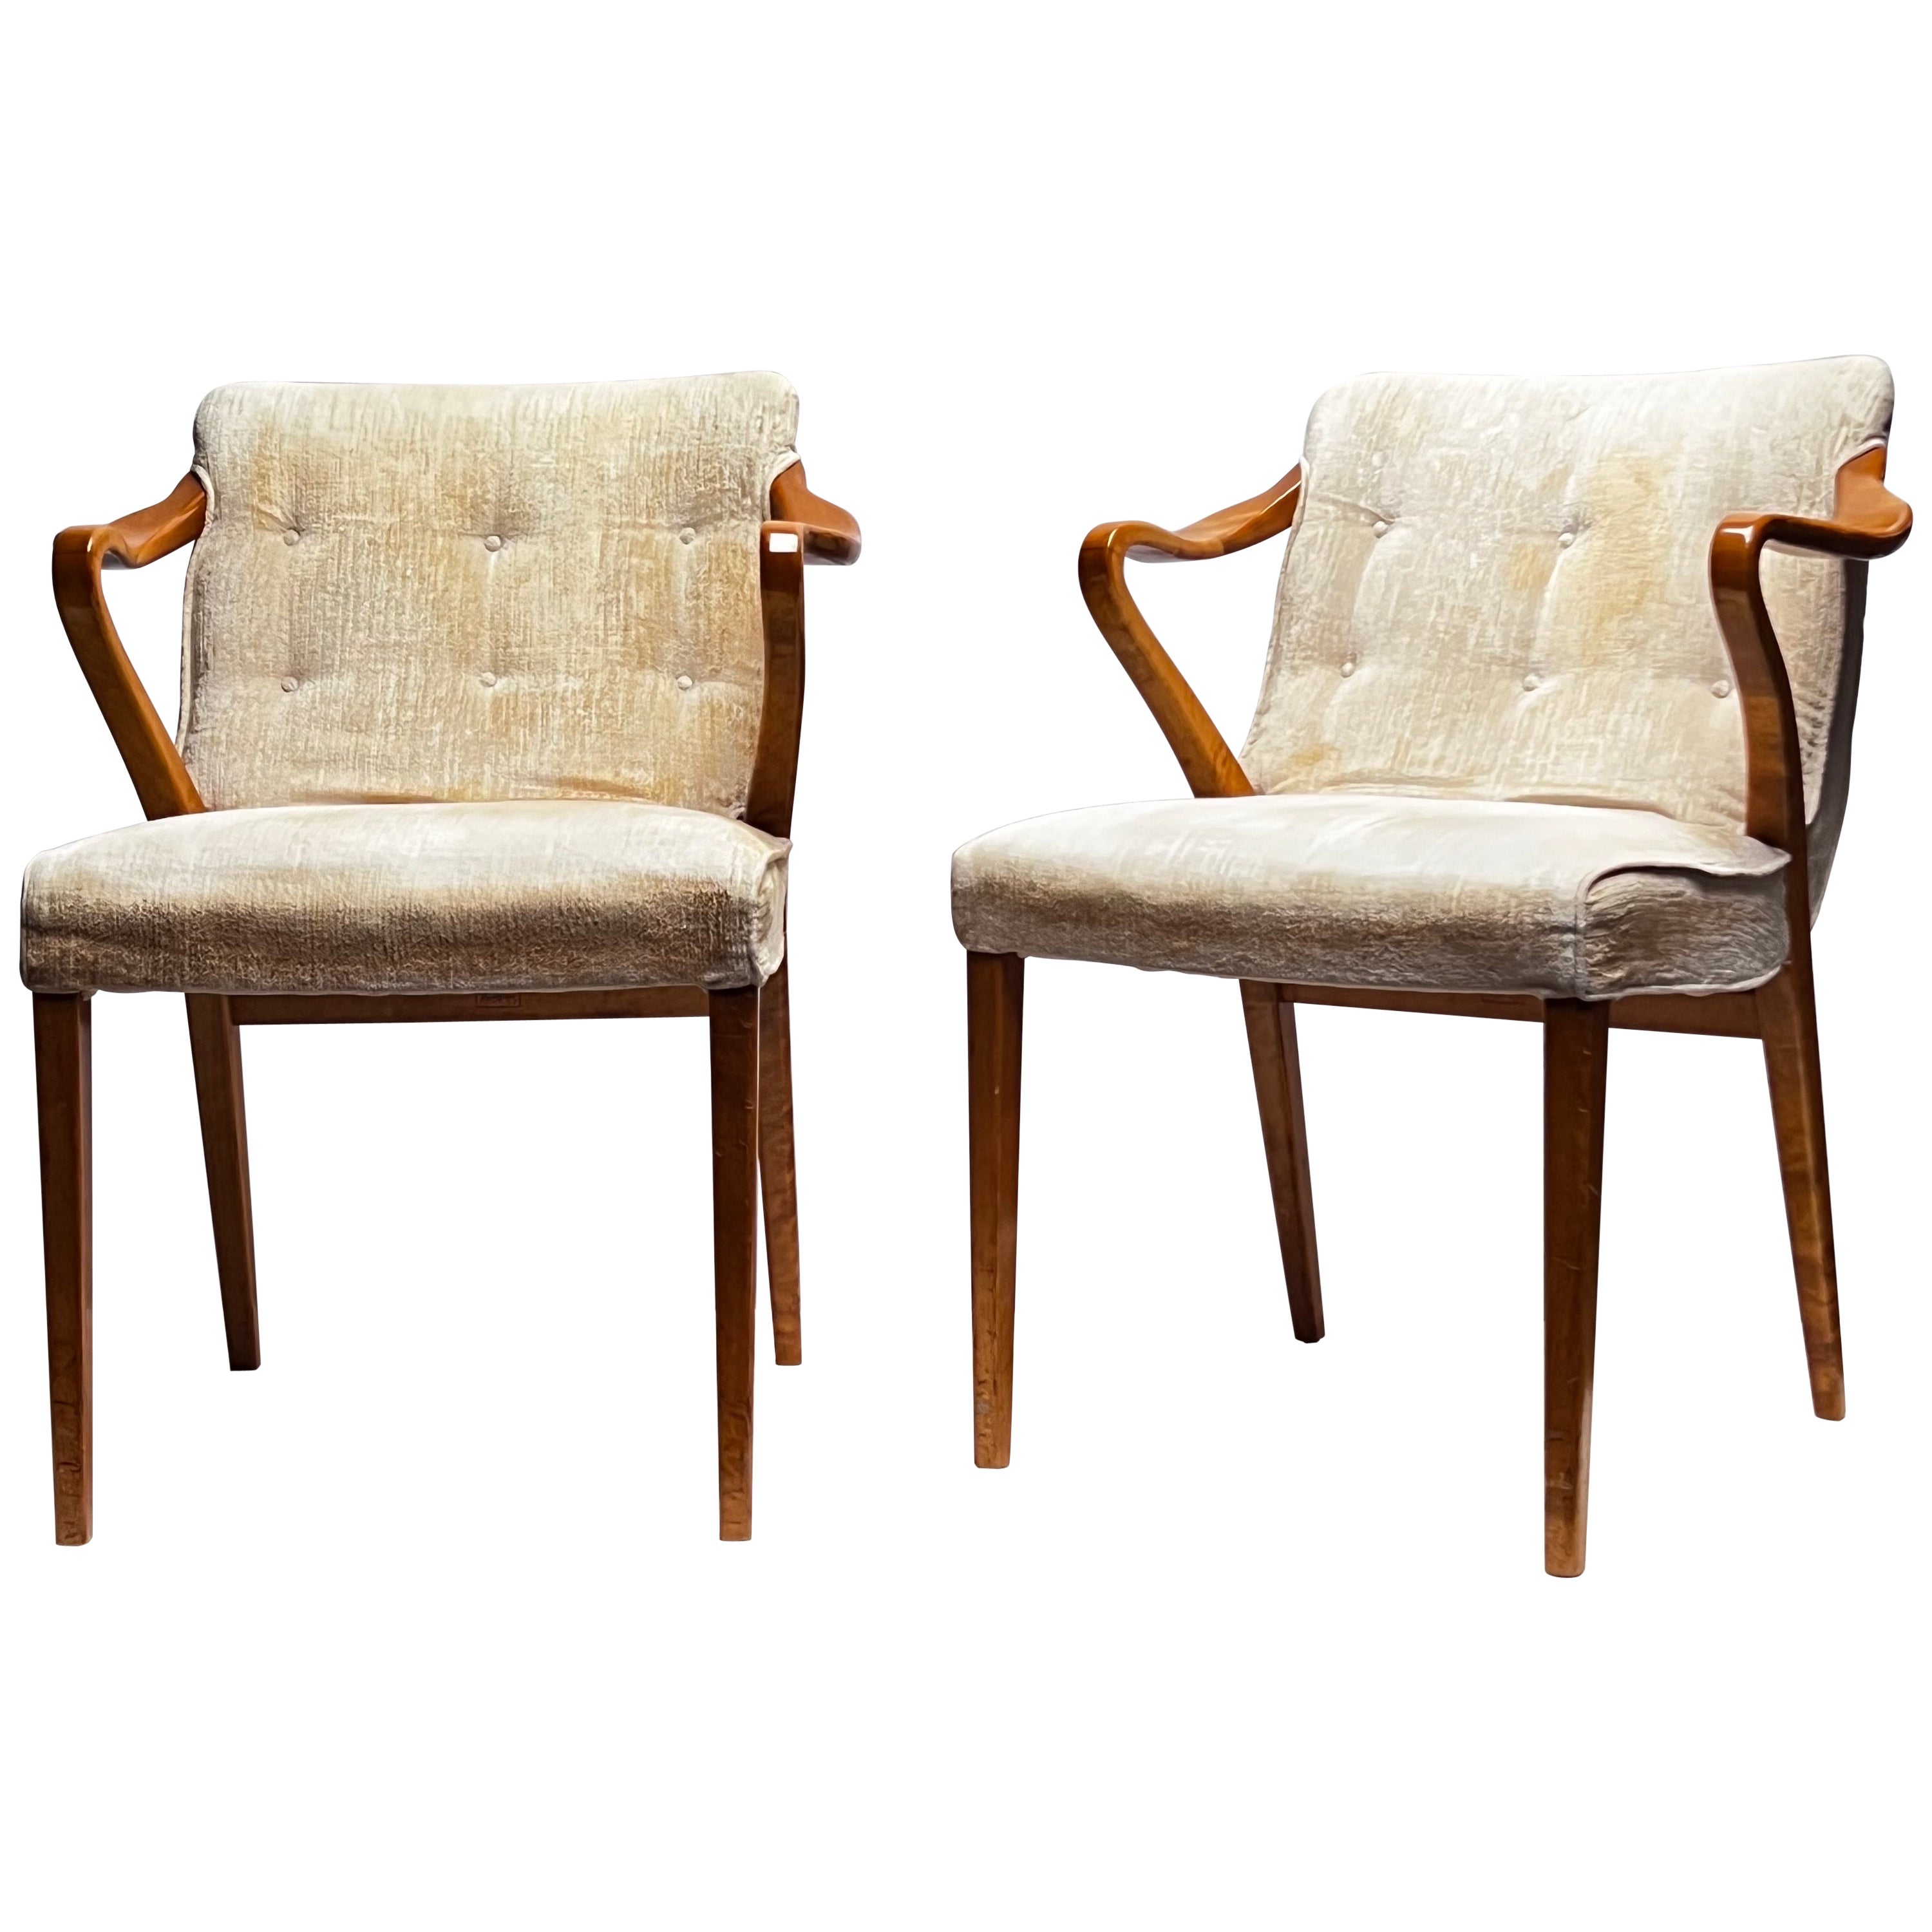 Axel Larsson pair for Bodafors 1930's All Original Decorative and comfortable 